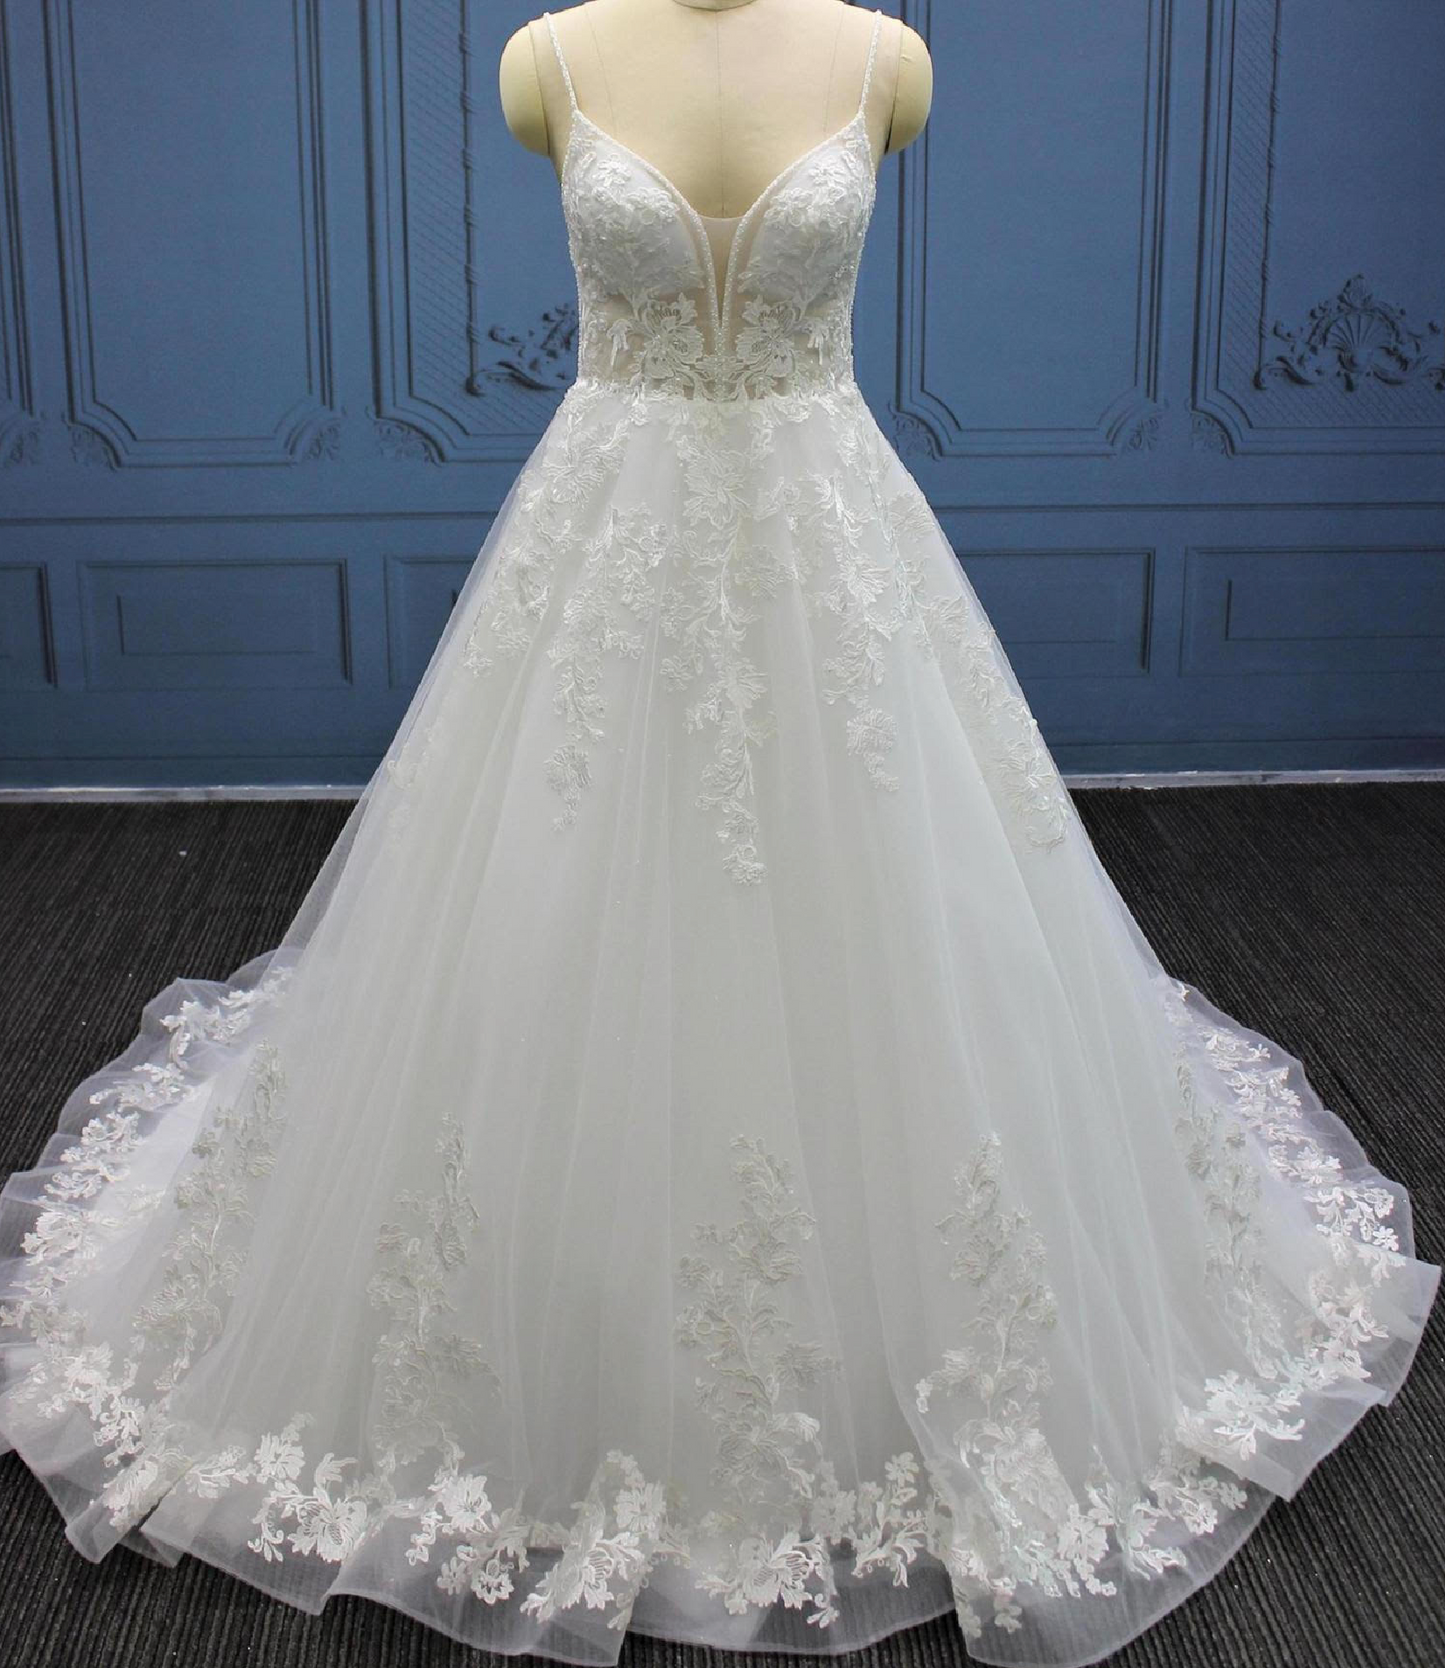 V Plunge A Line Tulle Lace Wedding Dress from Tulle Lux Bridal Crowns & Accessorires